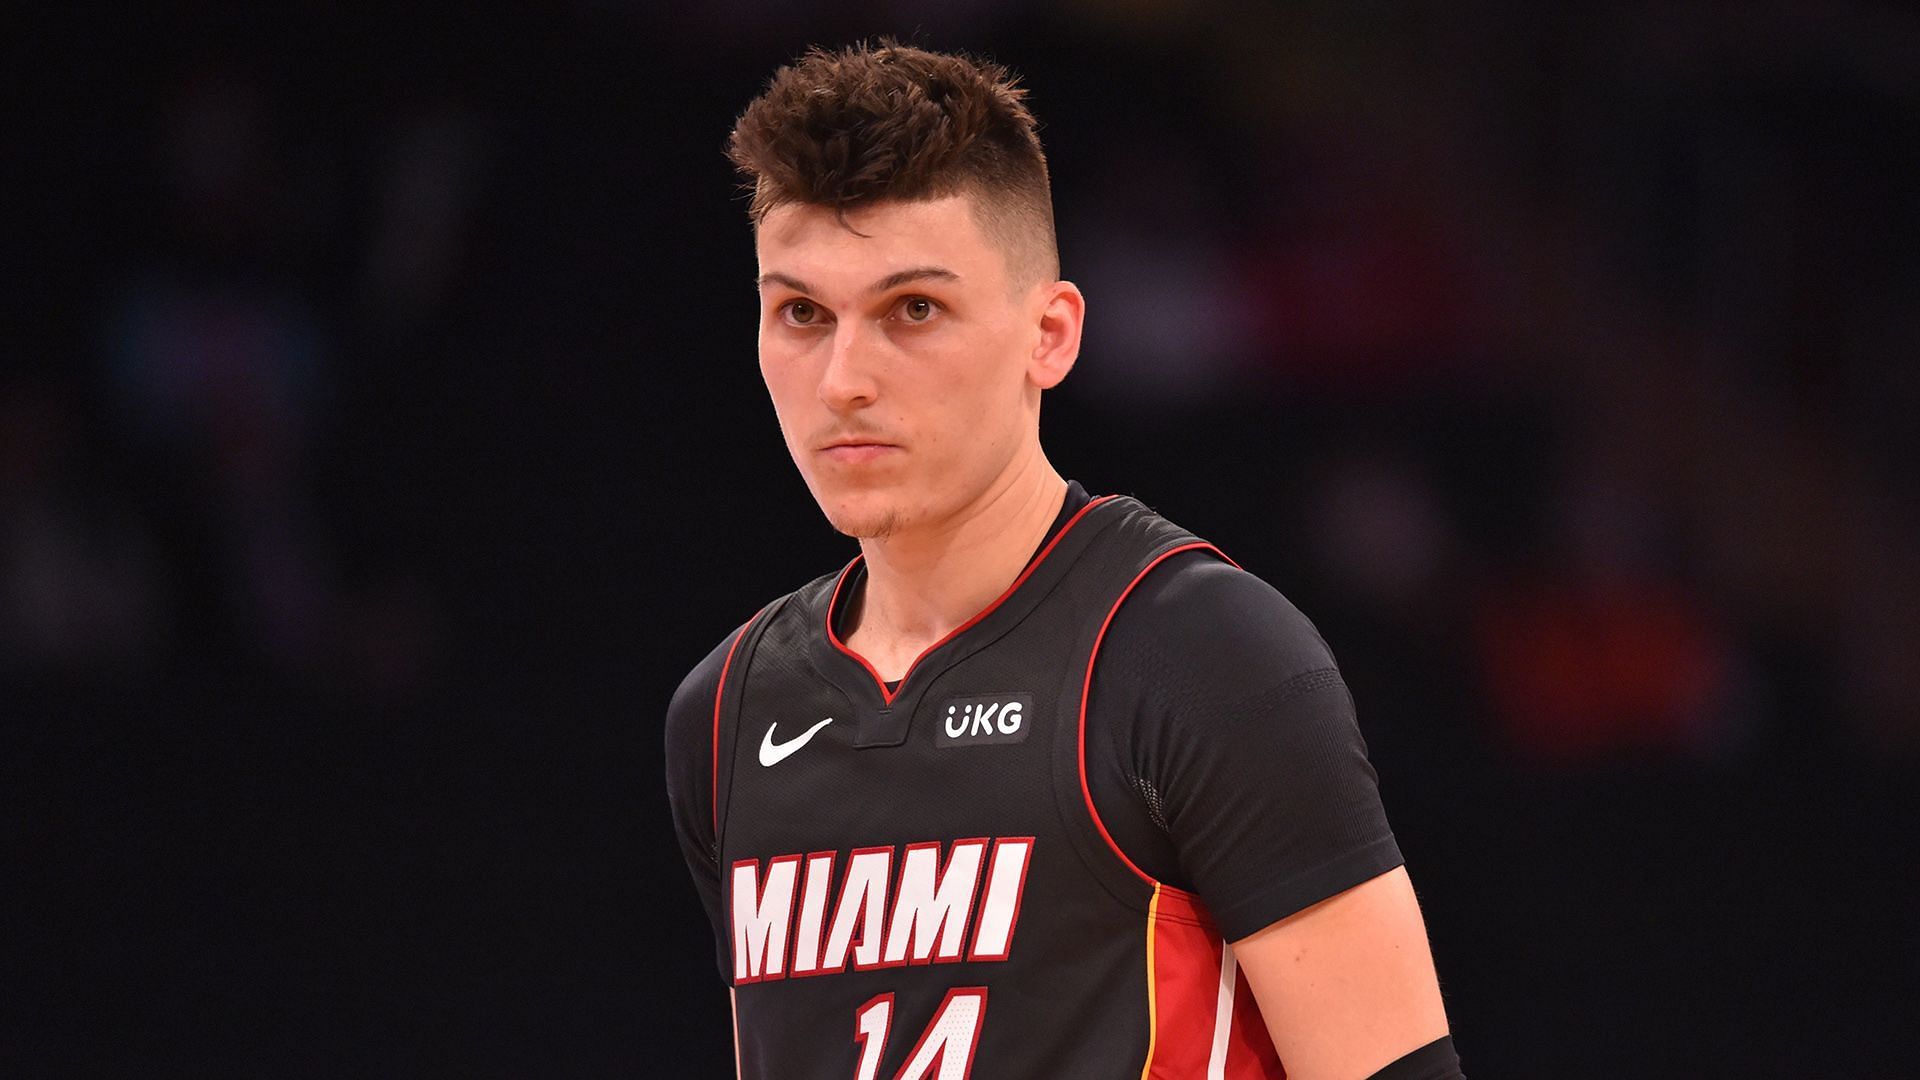 Tyler Herro is the favorite to win the Sixth Man of the Year crown this season for the Miami Heat. [Photo: NBA.com]